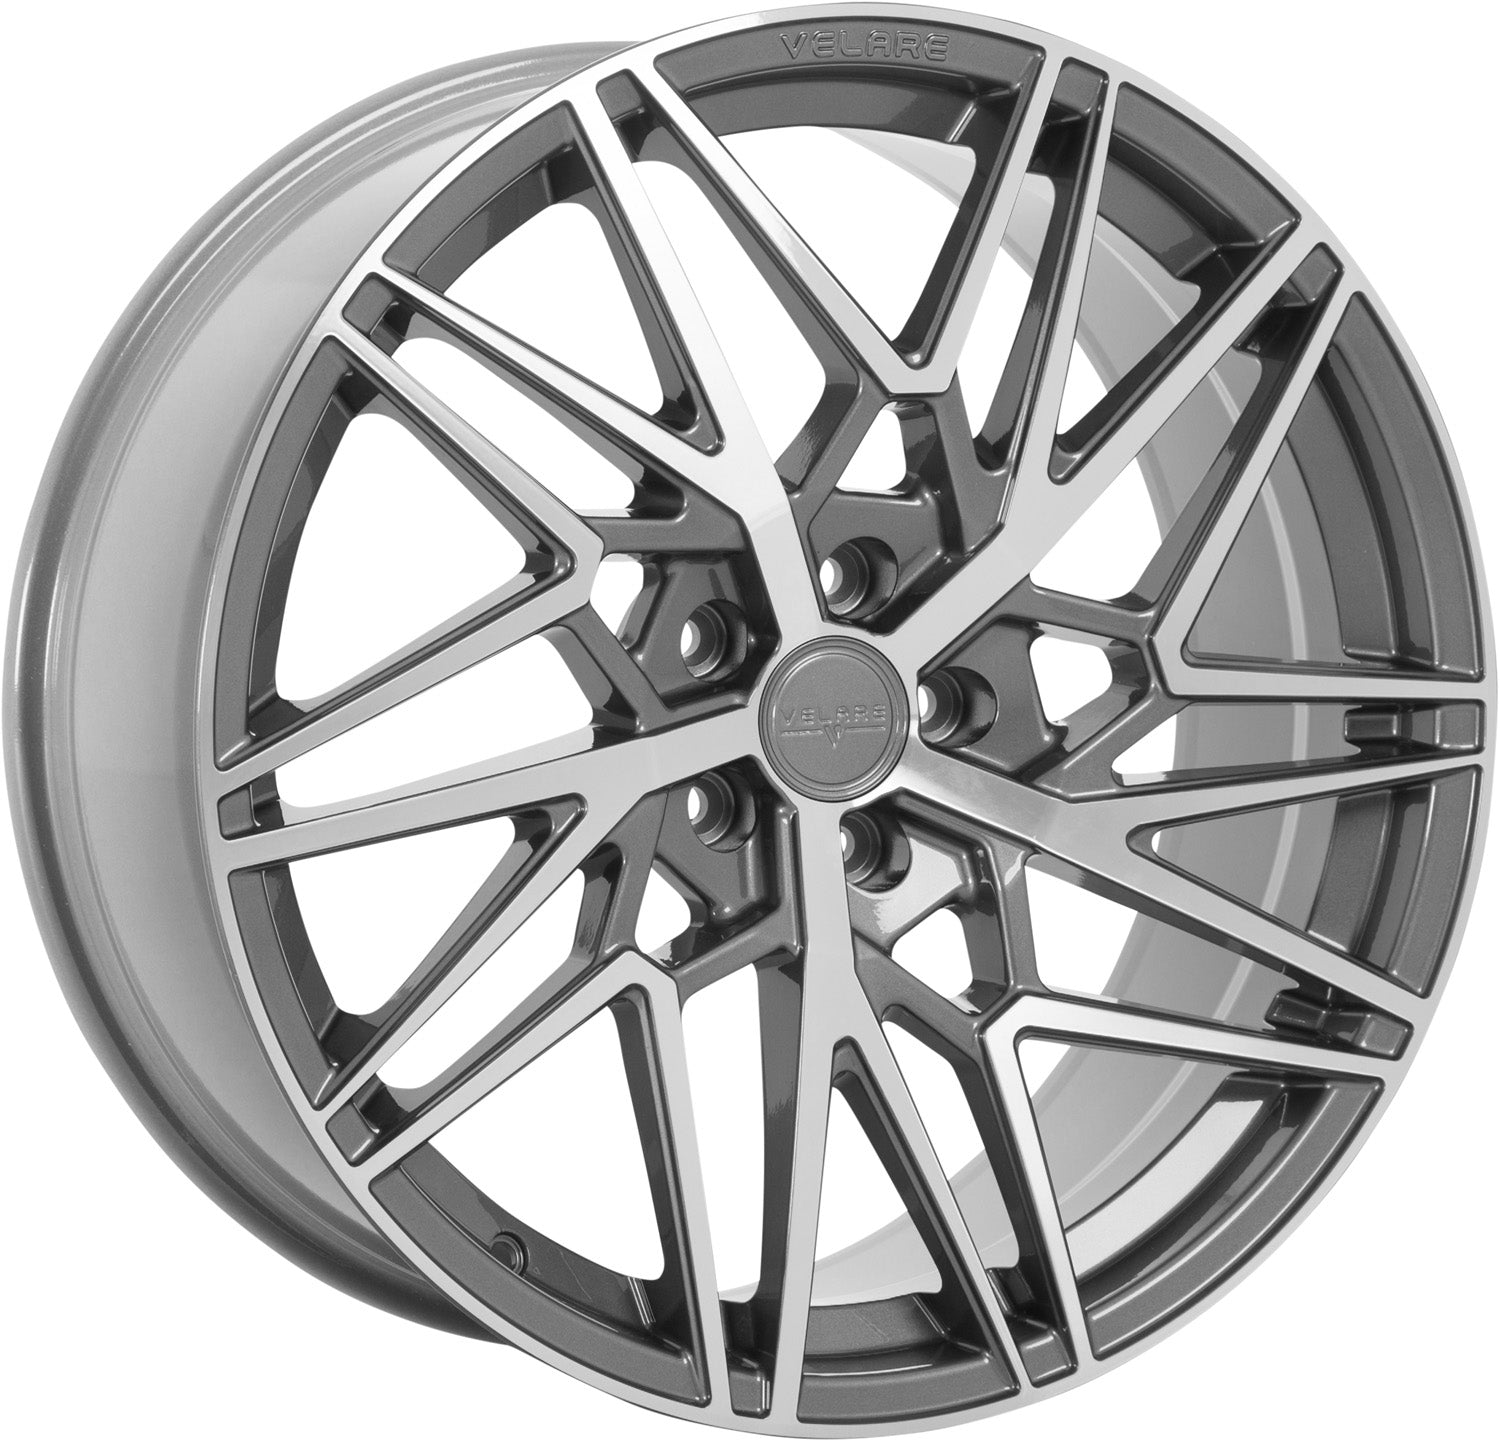 VLR06  Wheel and Tyre Package